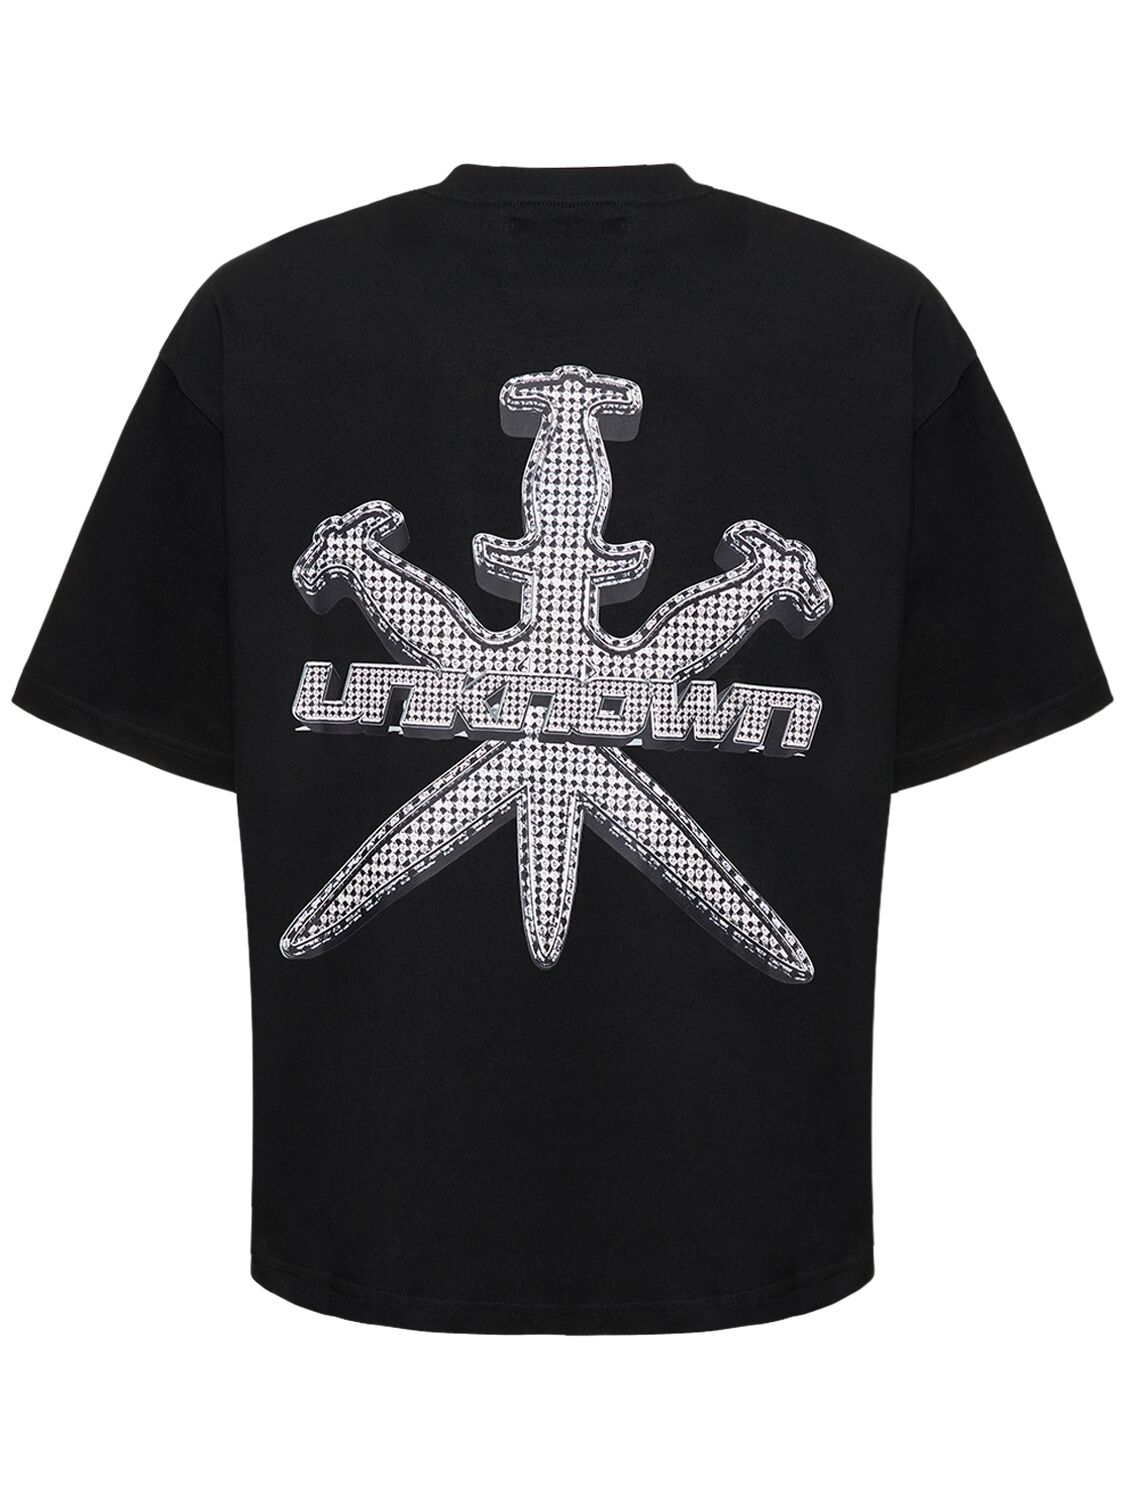 t-shirt iced out style dagger